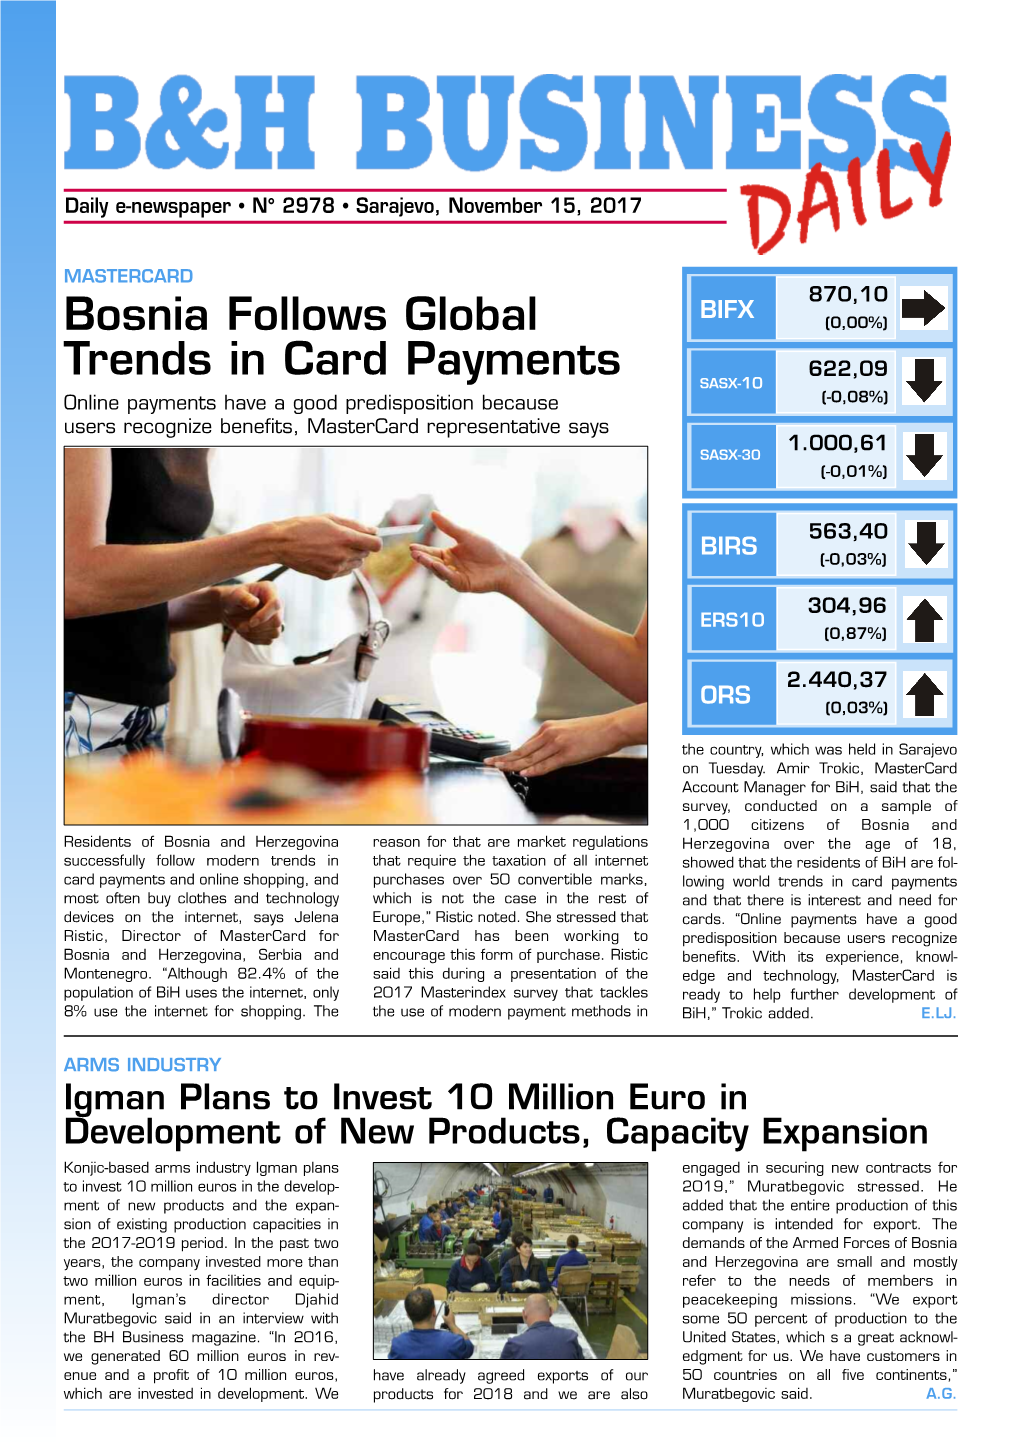 Bosnia Follows Global Trends in Card Payments